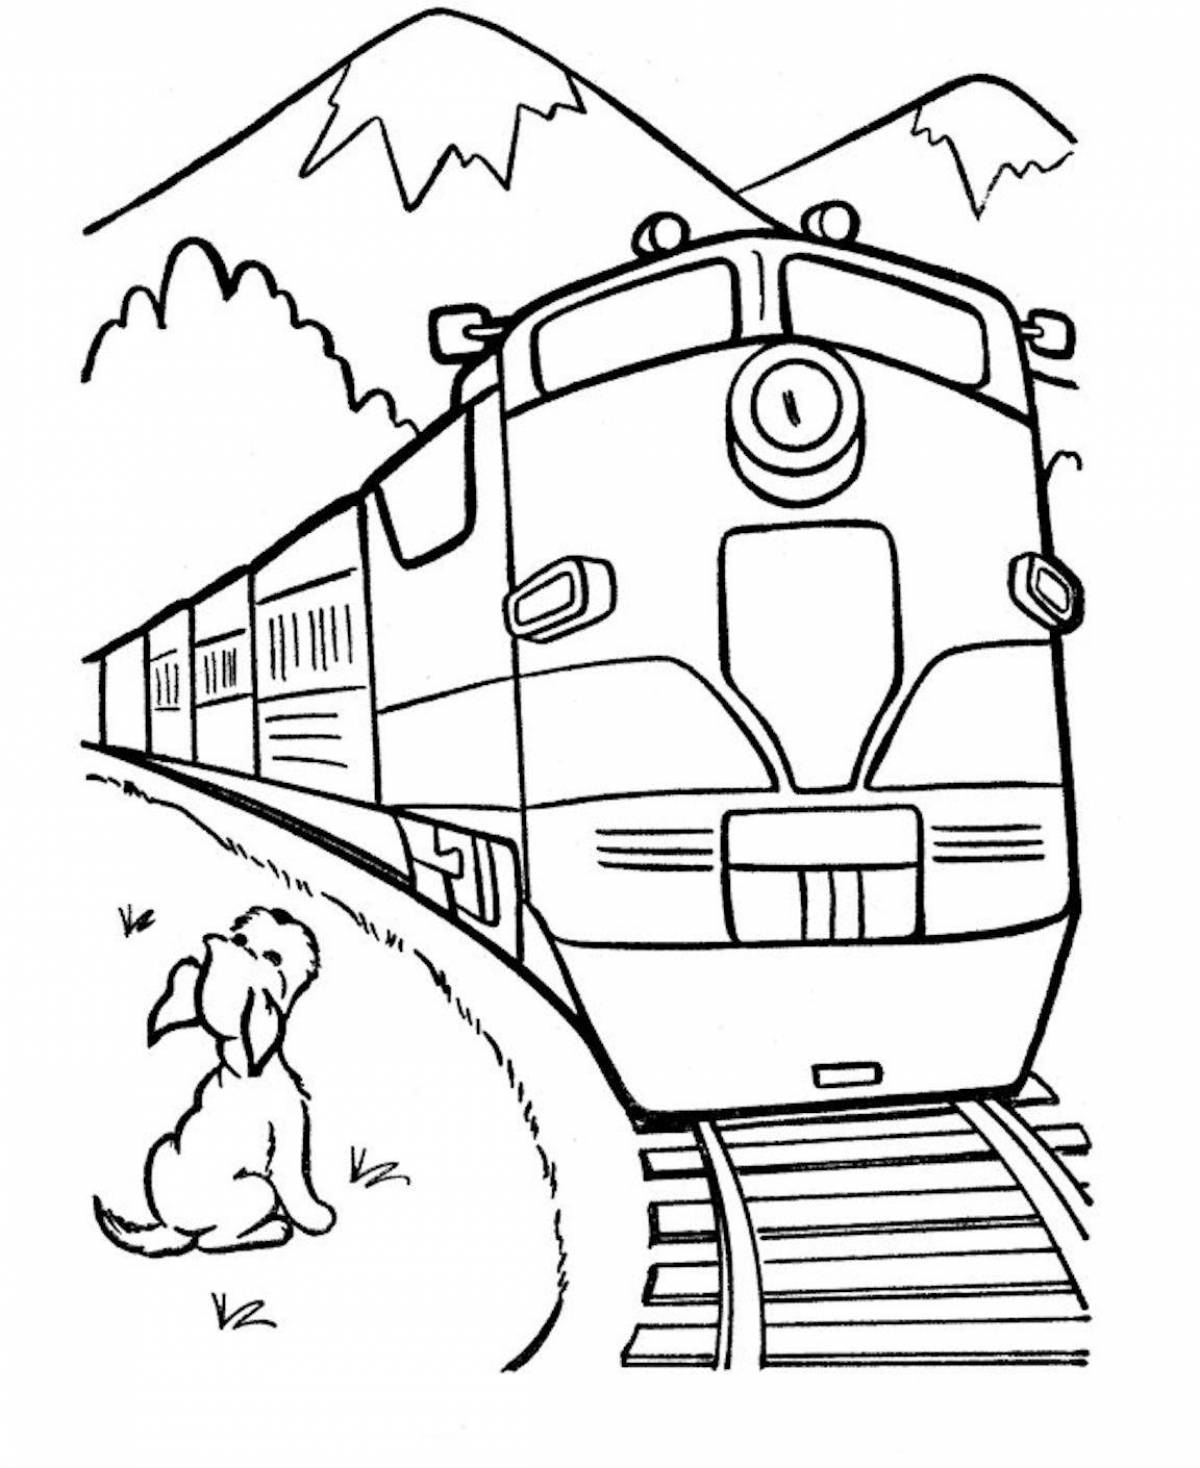 Wonderful train coloring book for 5-6 year olds